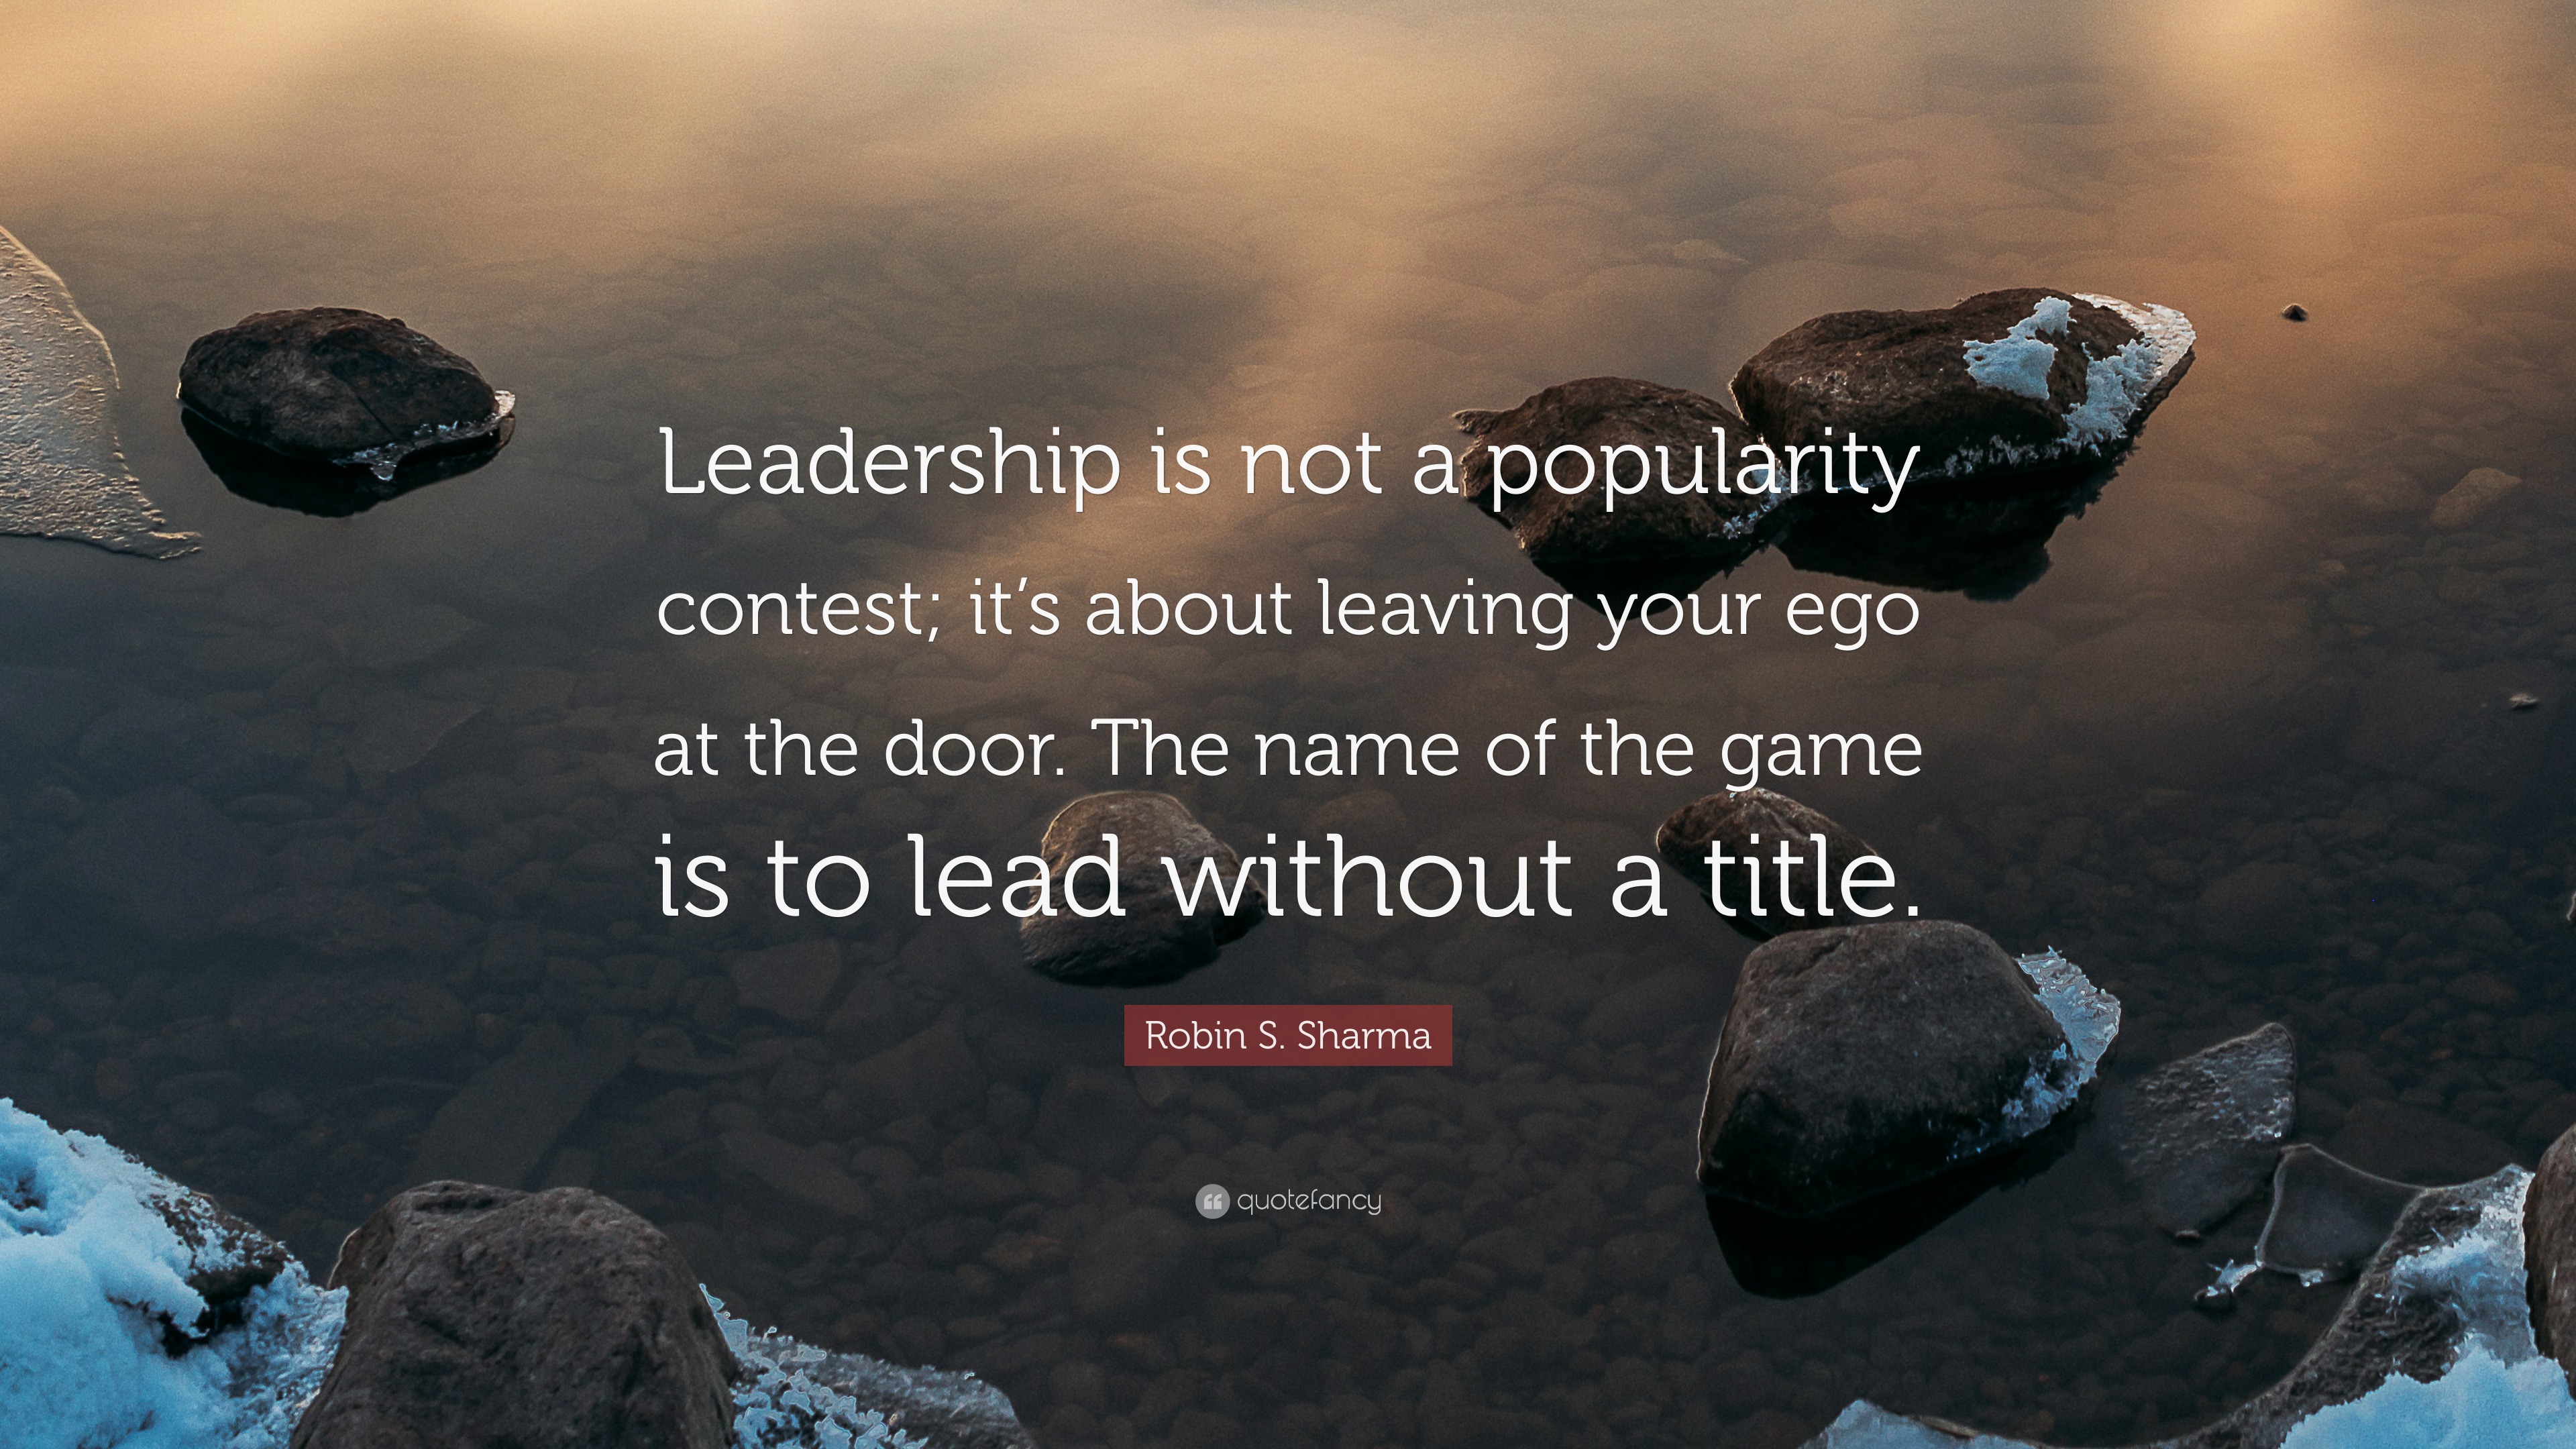 Robin S. Sharma Quote: “Leadership is not a popularity contest; it’s